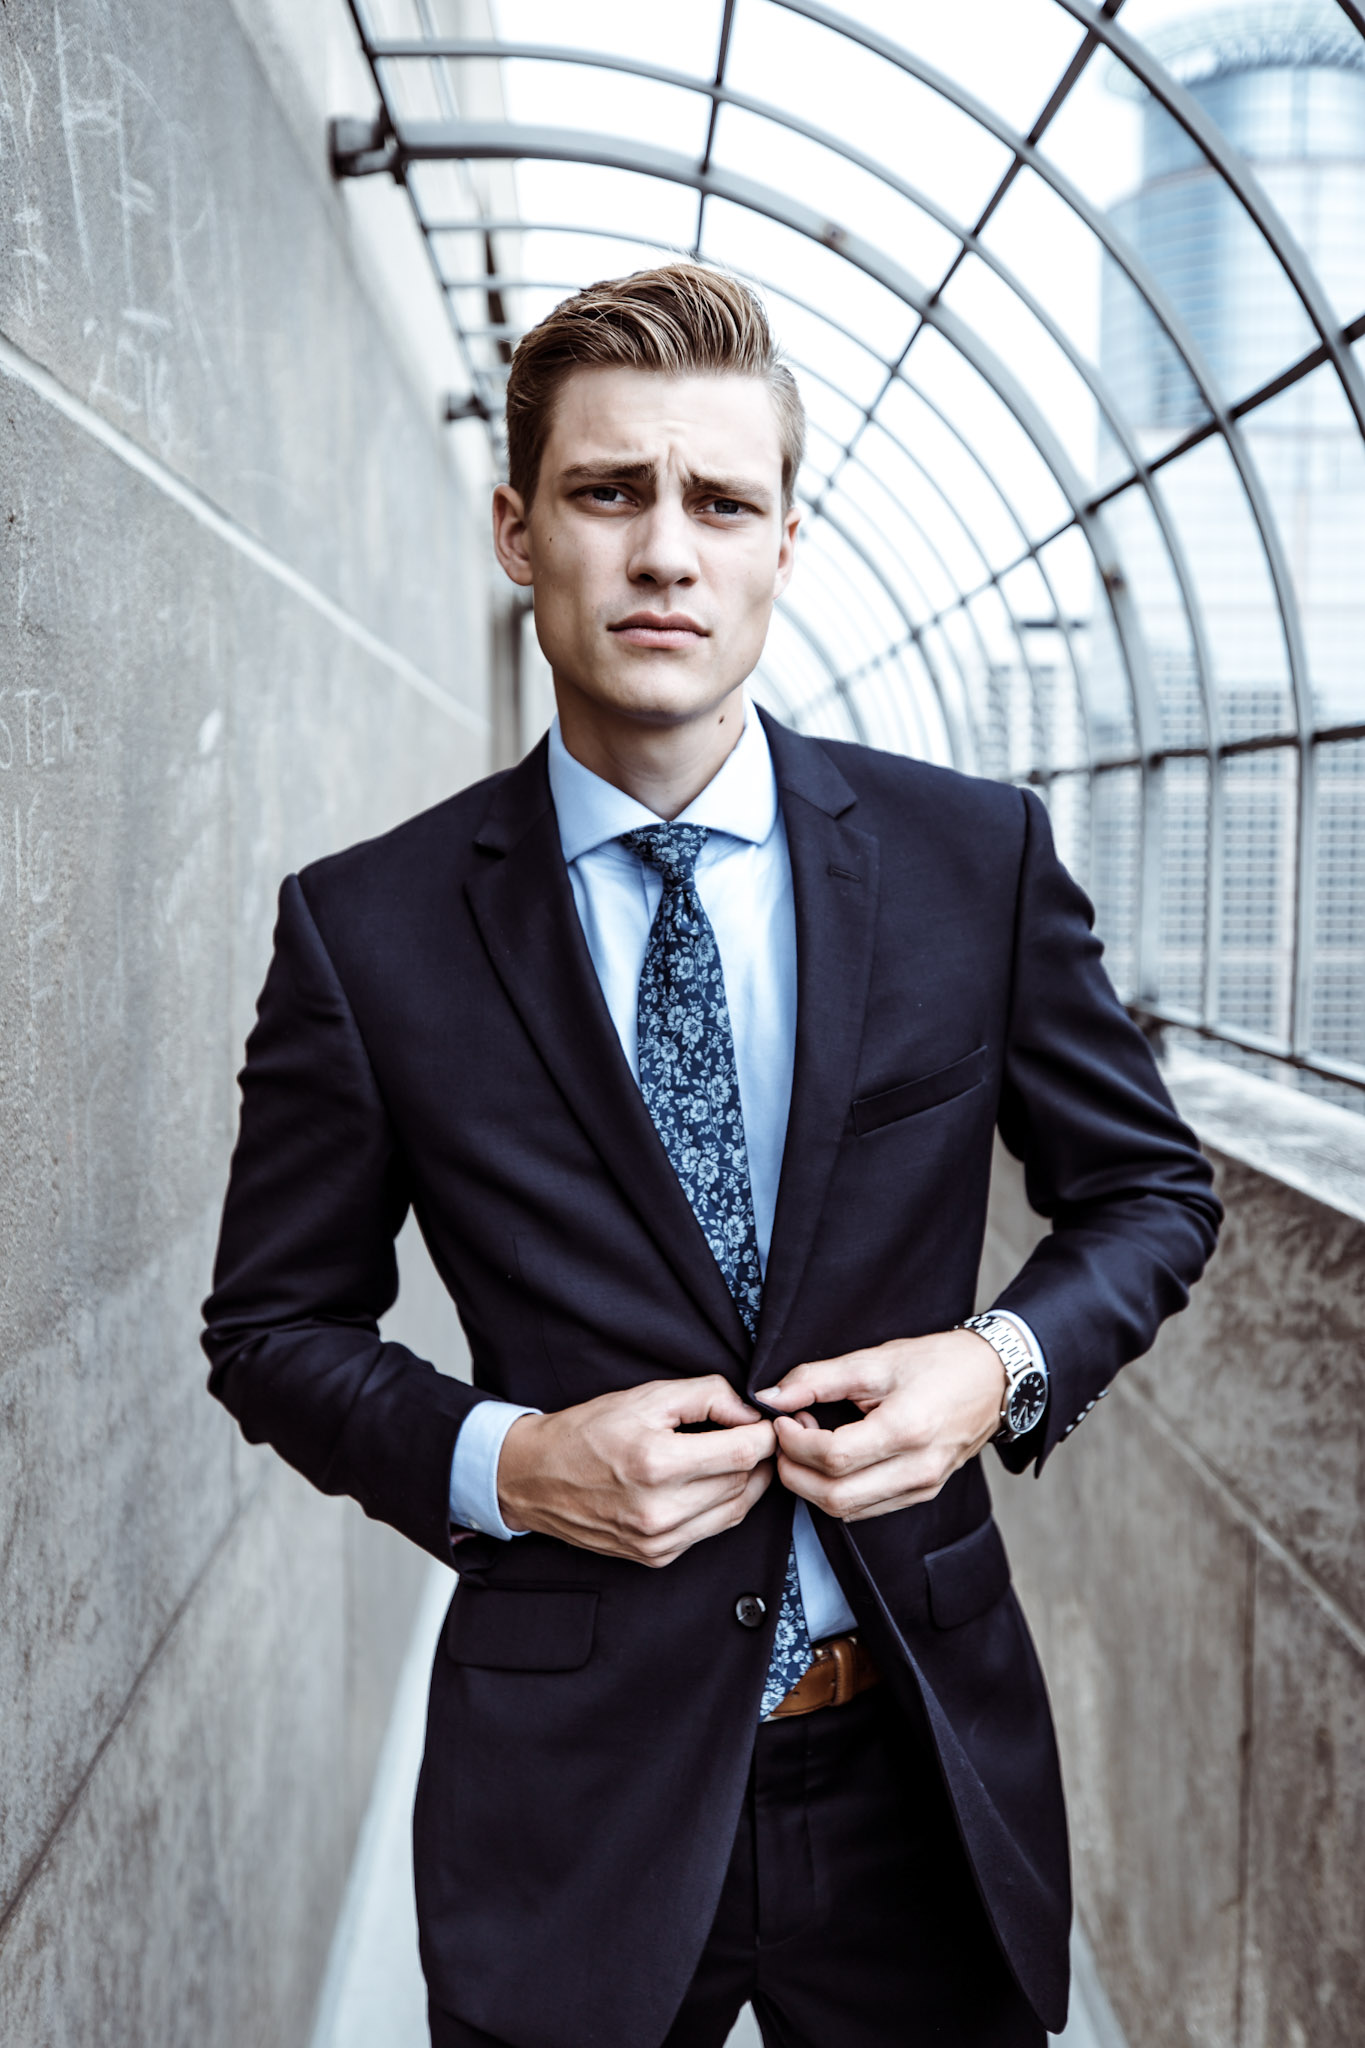 A Guide to Creating a Men’s Outfit for a Formal Event